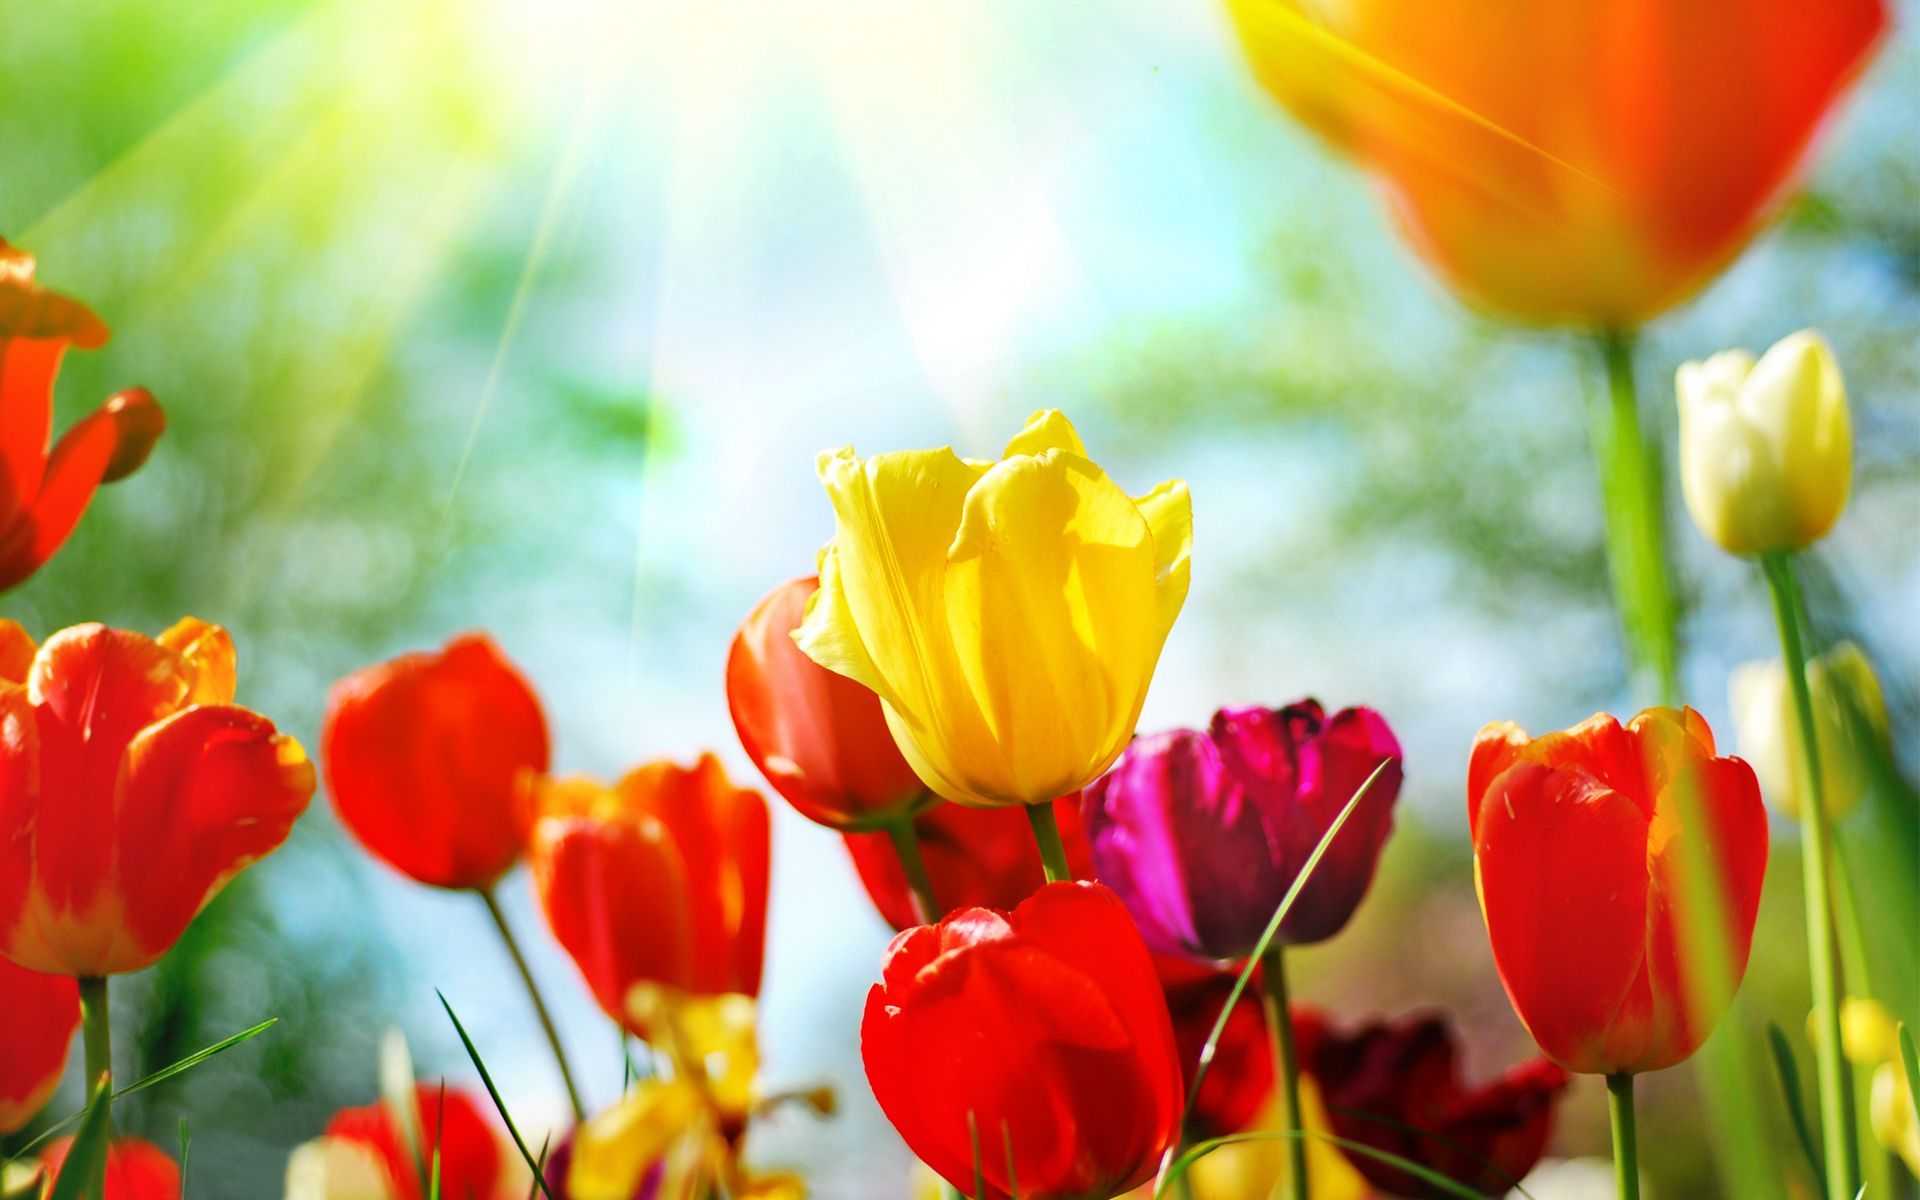 Spring Background free download Wallpapers, Backgrounds, Images